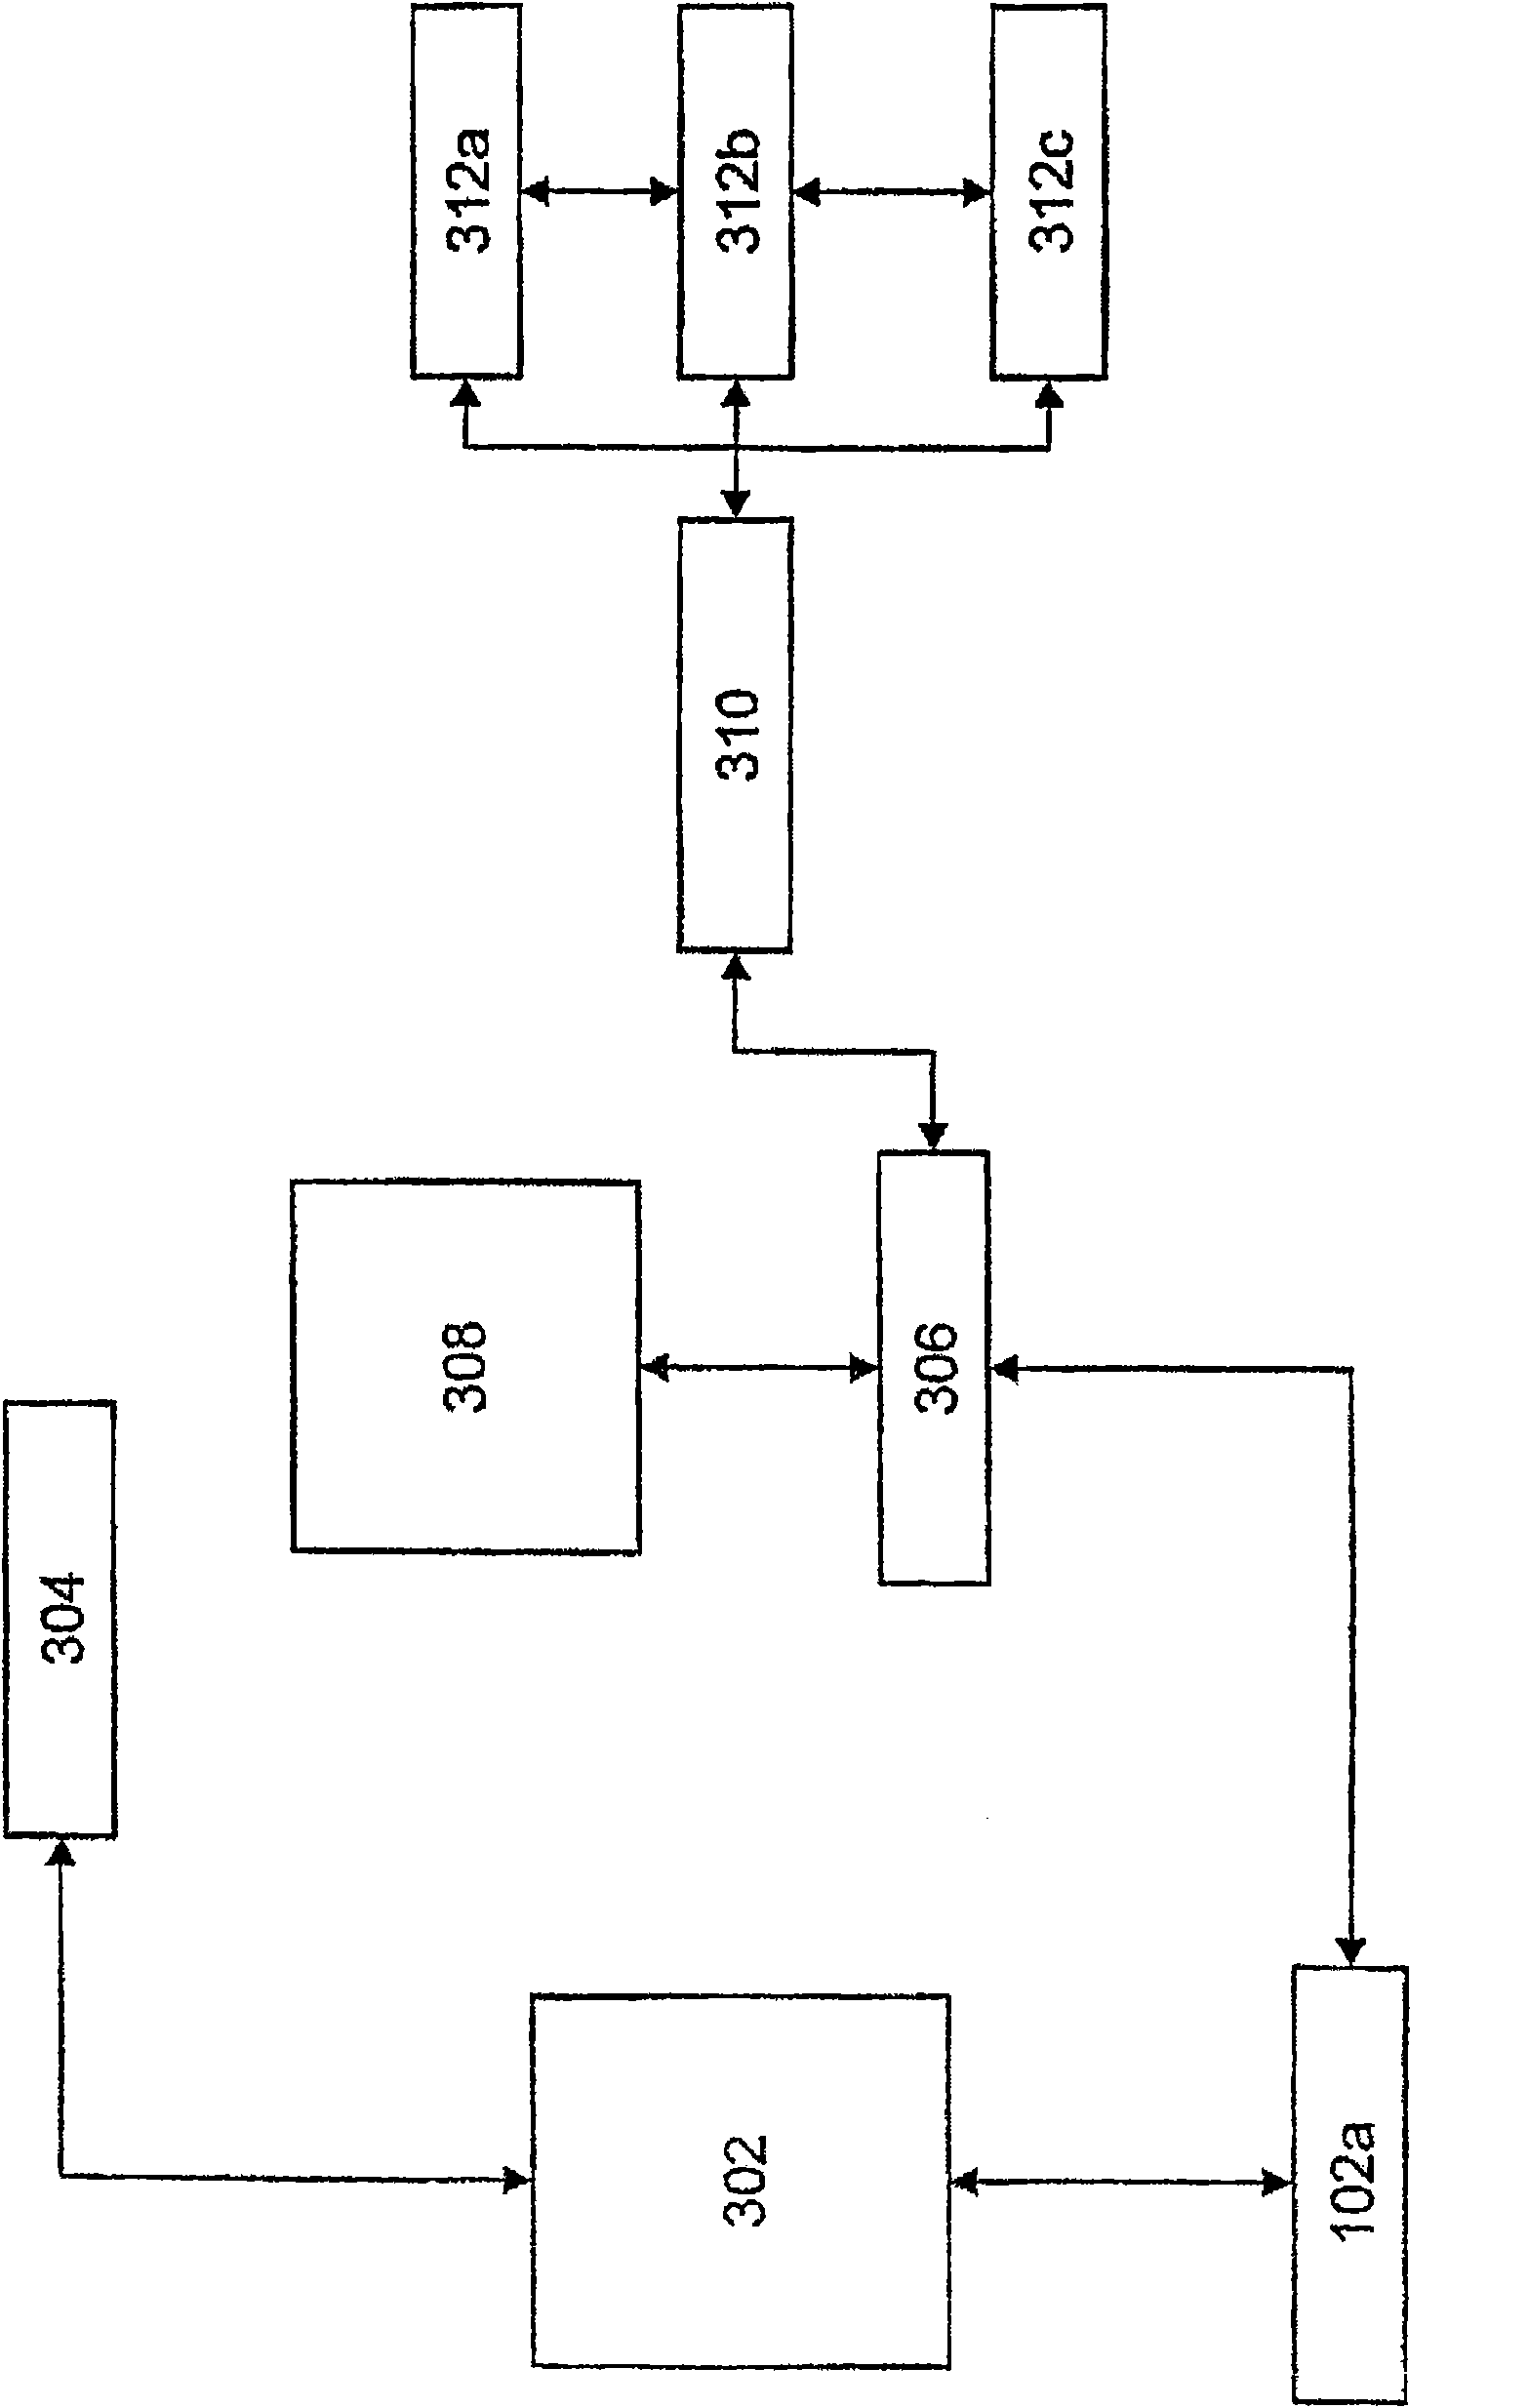 A method and apparatus for the delivery of digital data